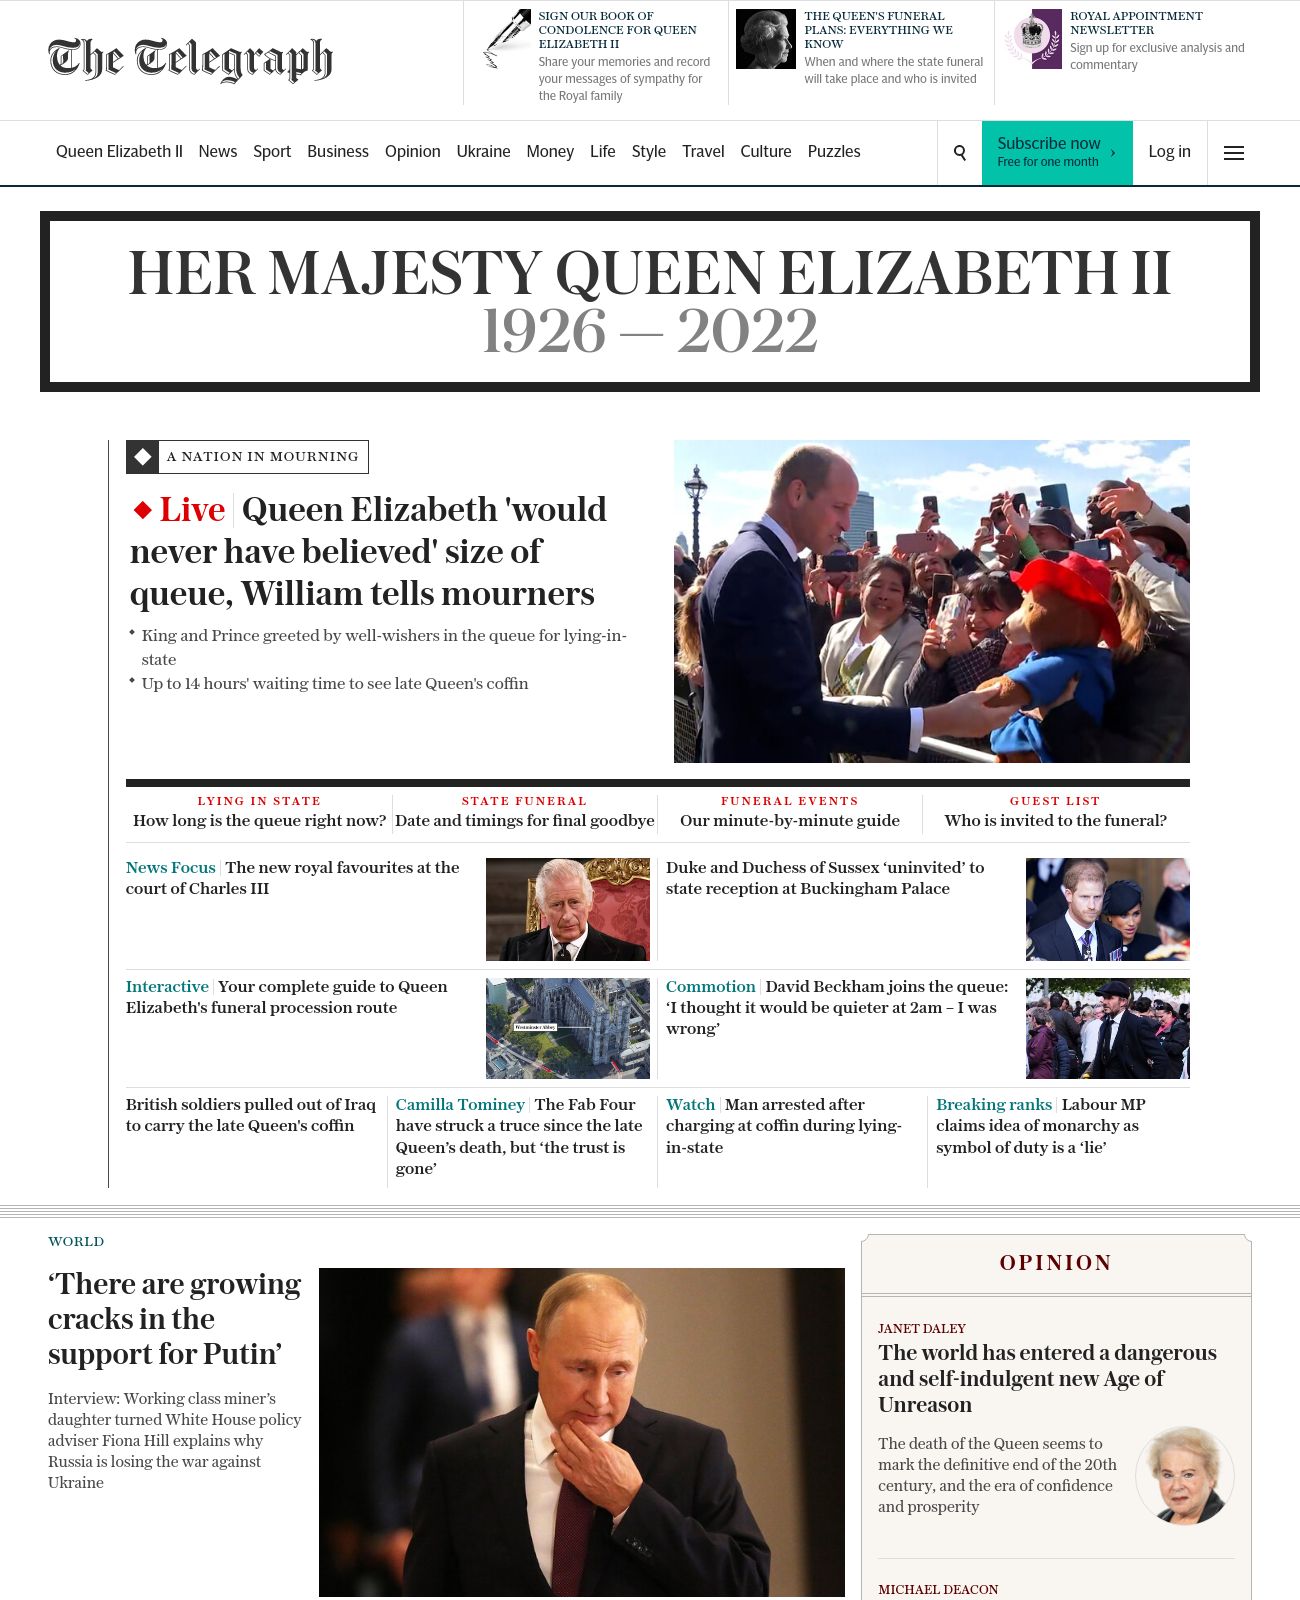 The Telegraph at 2022-09-17 14:57:57+01:00 local time